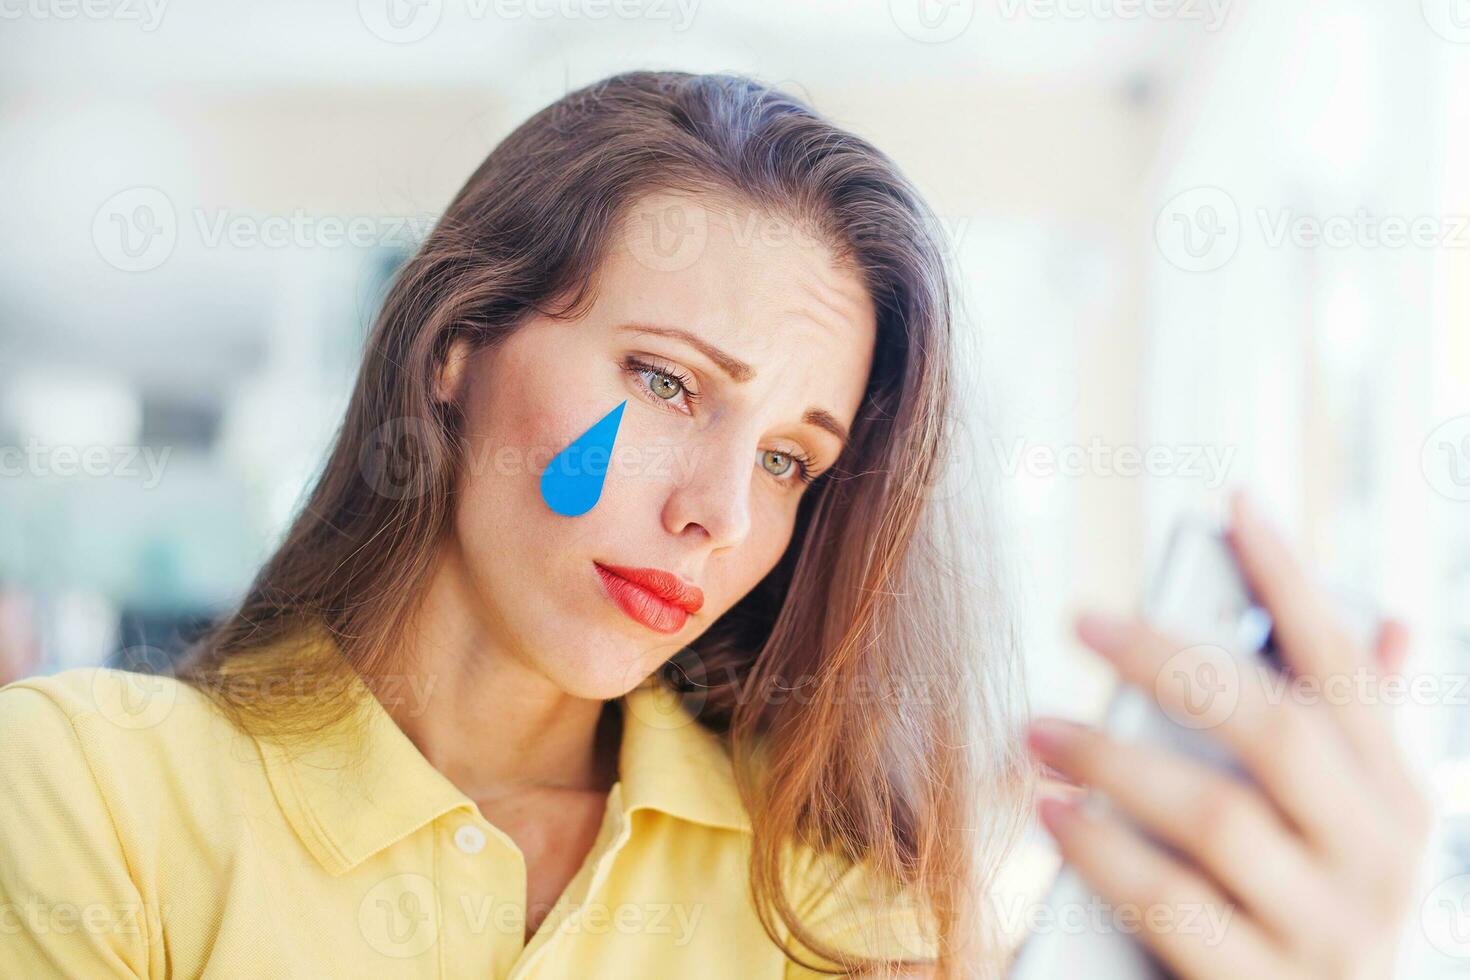 a woman with a tear on her face is looking at her phone photo